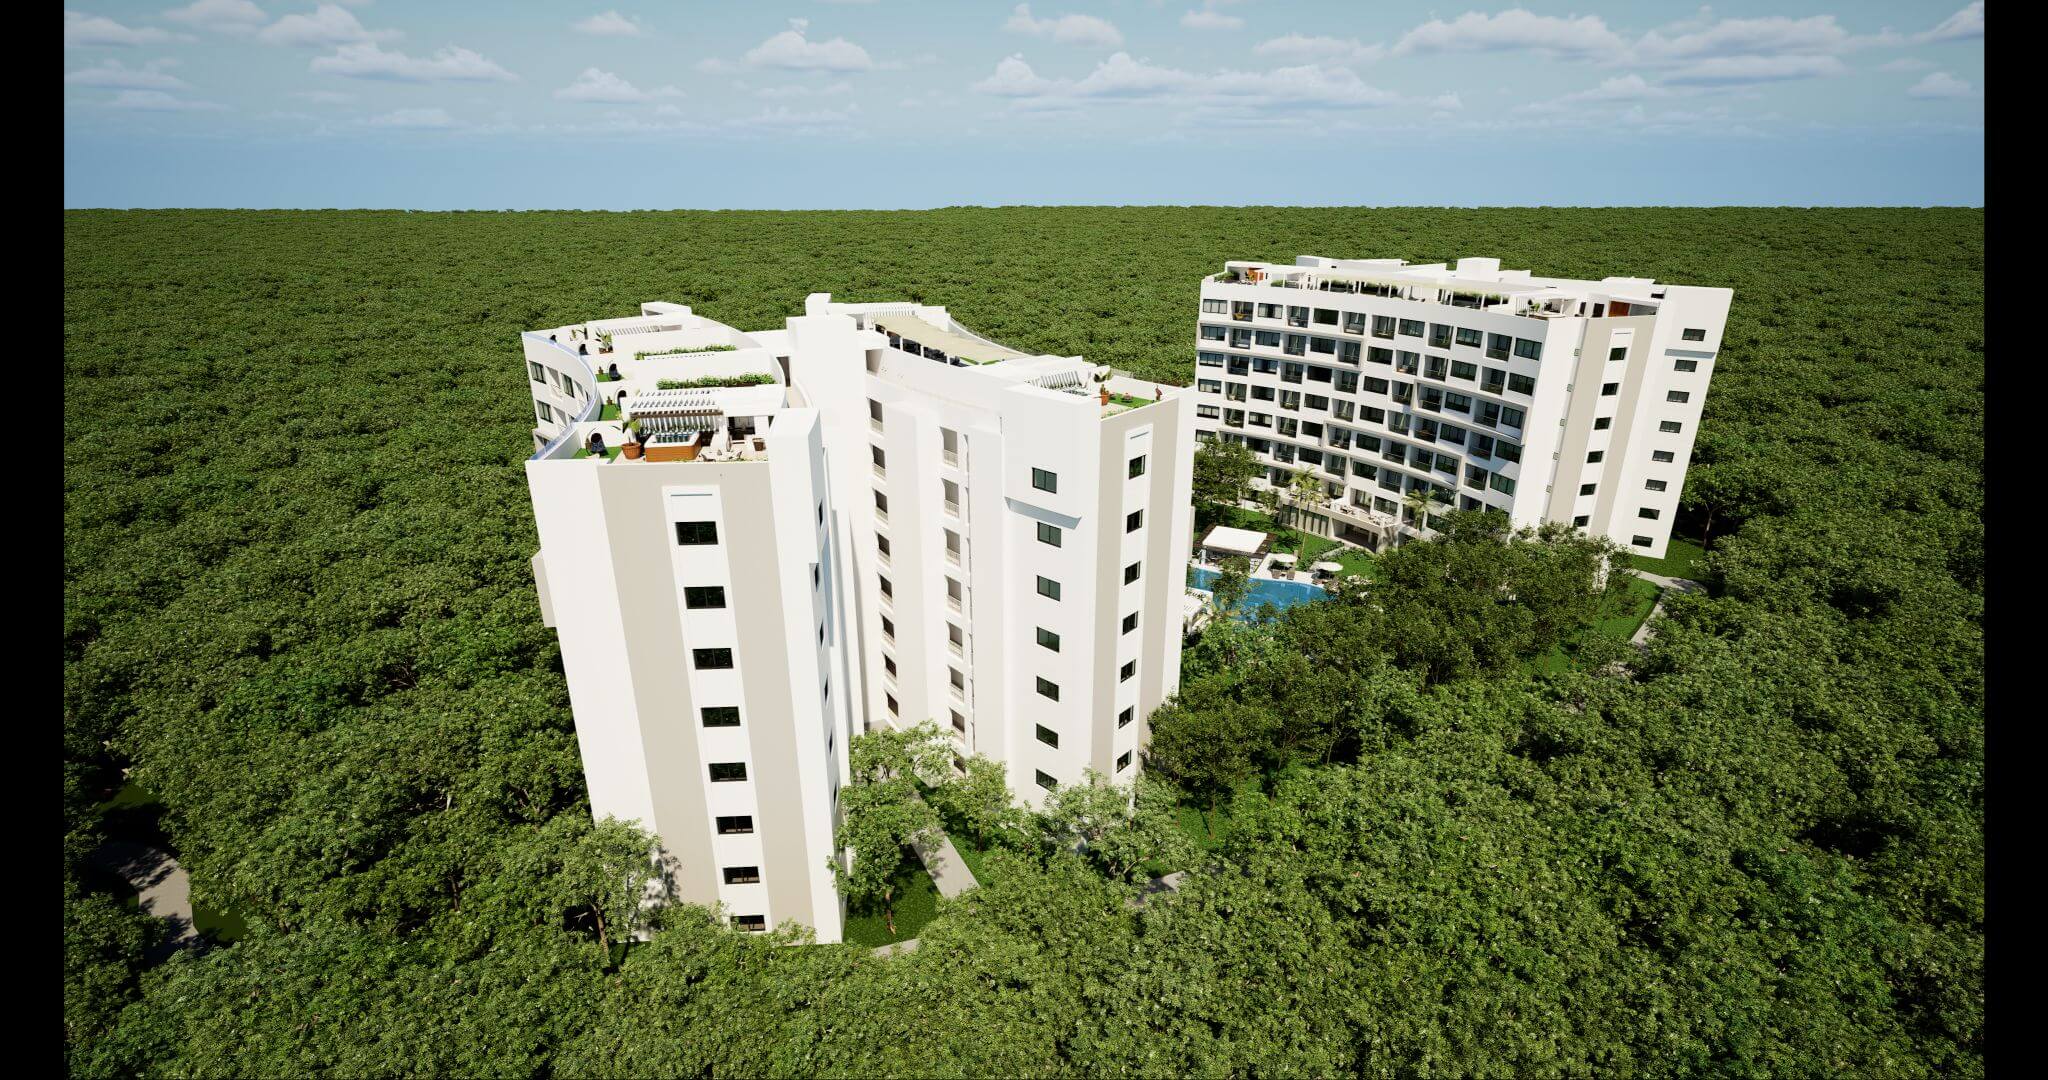 Condo 200 meters from the beach, ocean-view pool, for sale in Cocobeach.